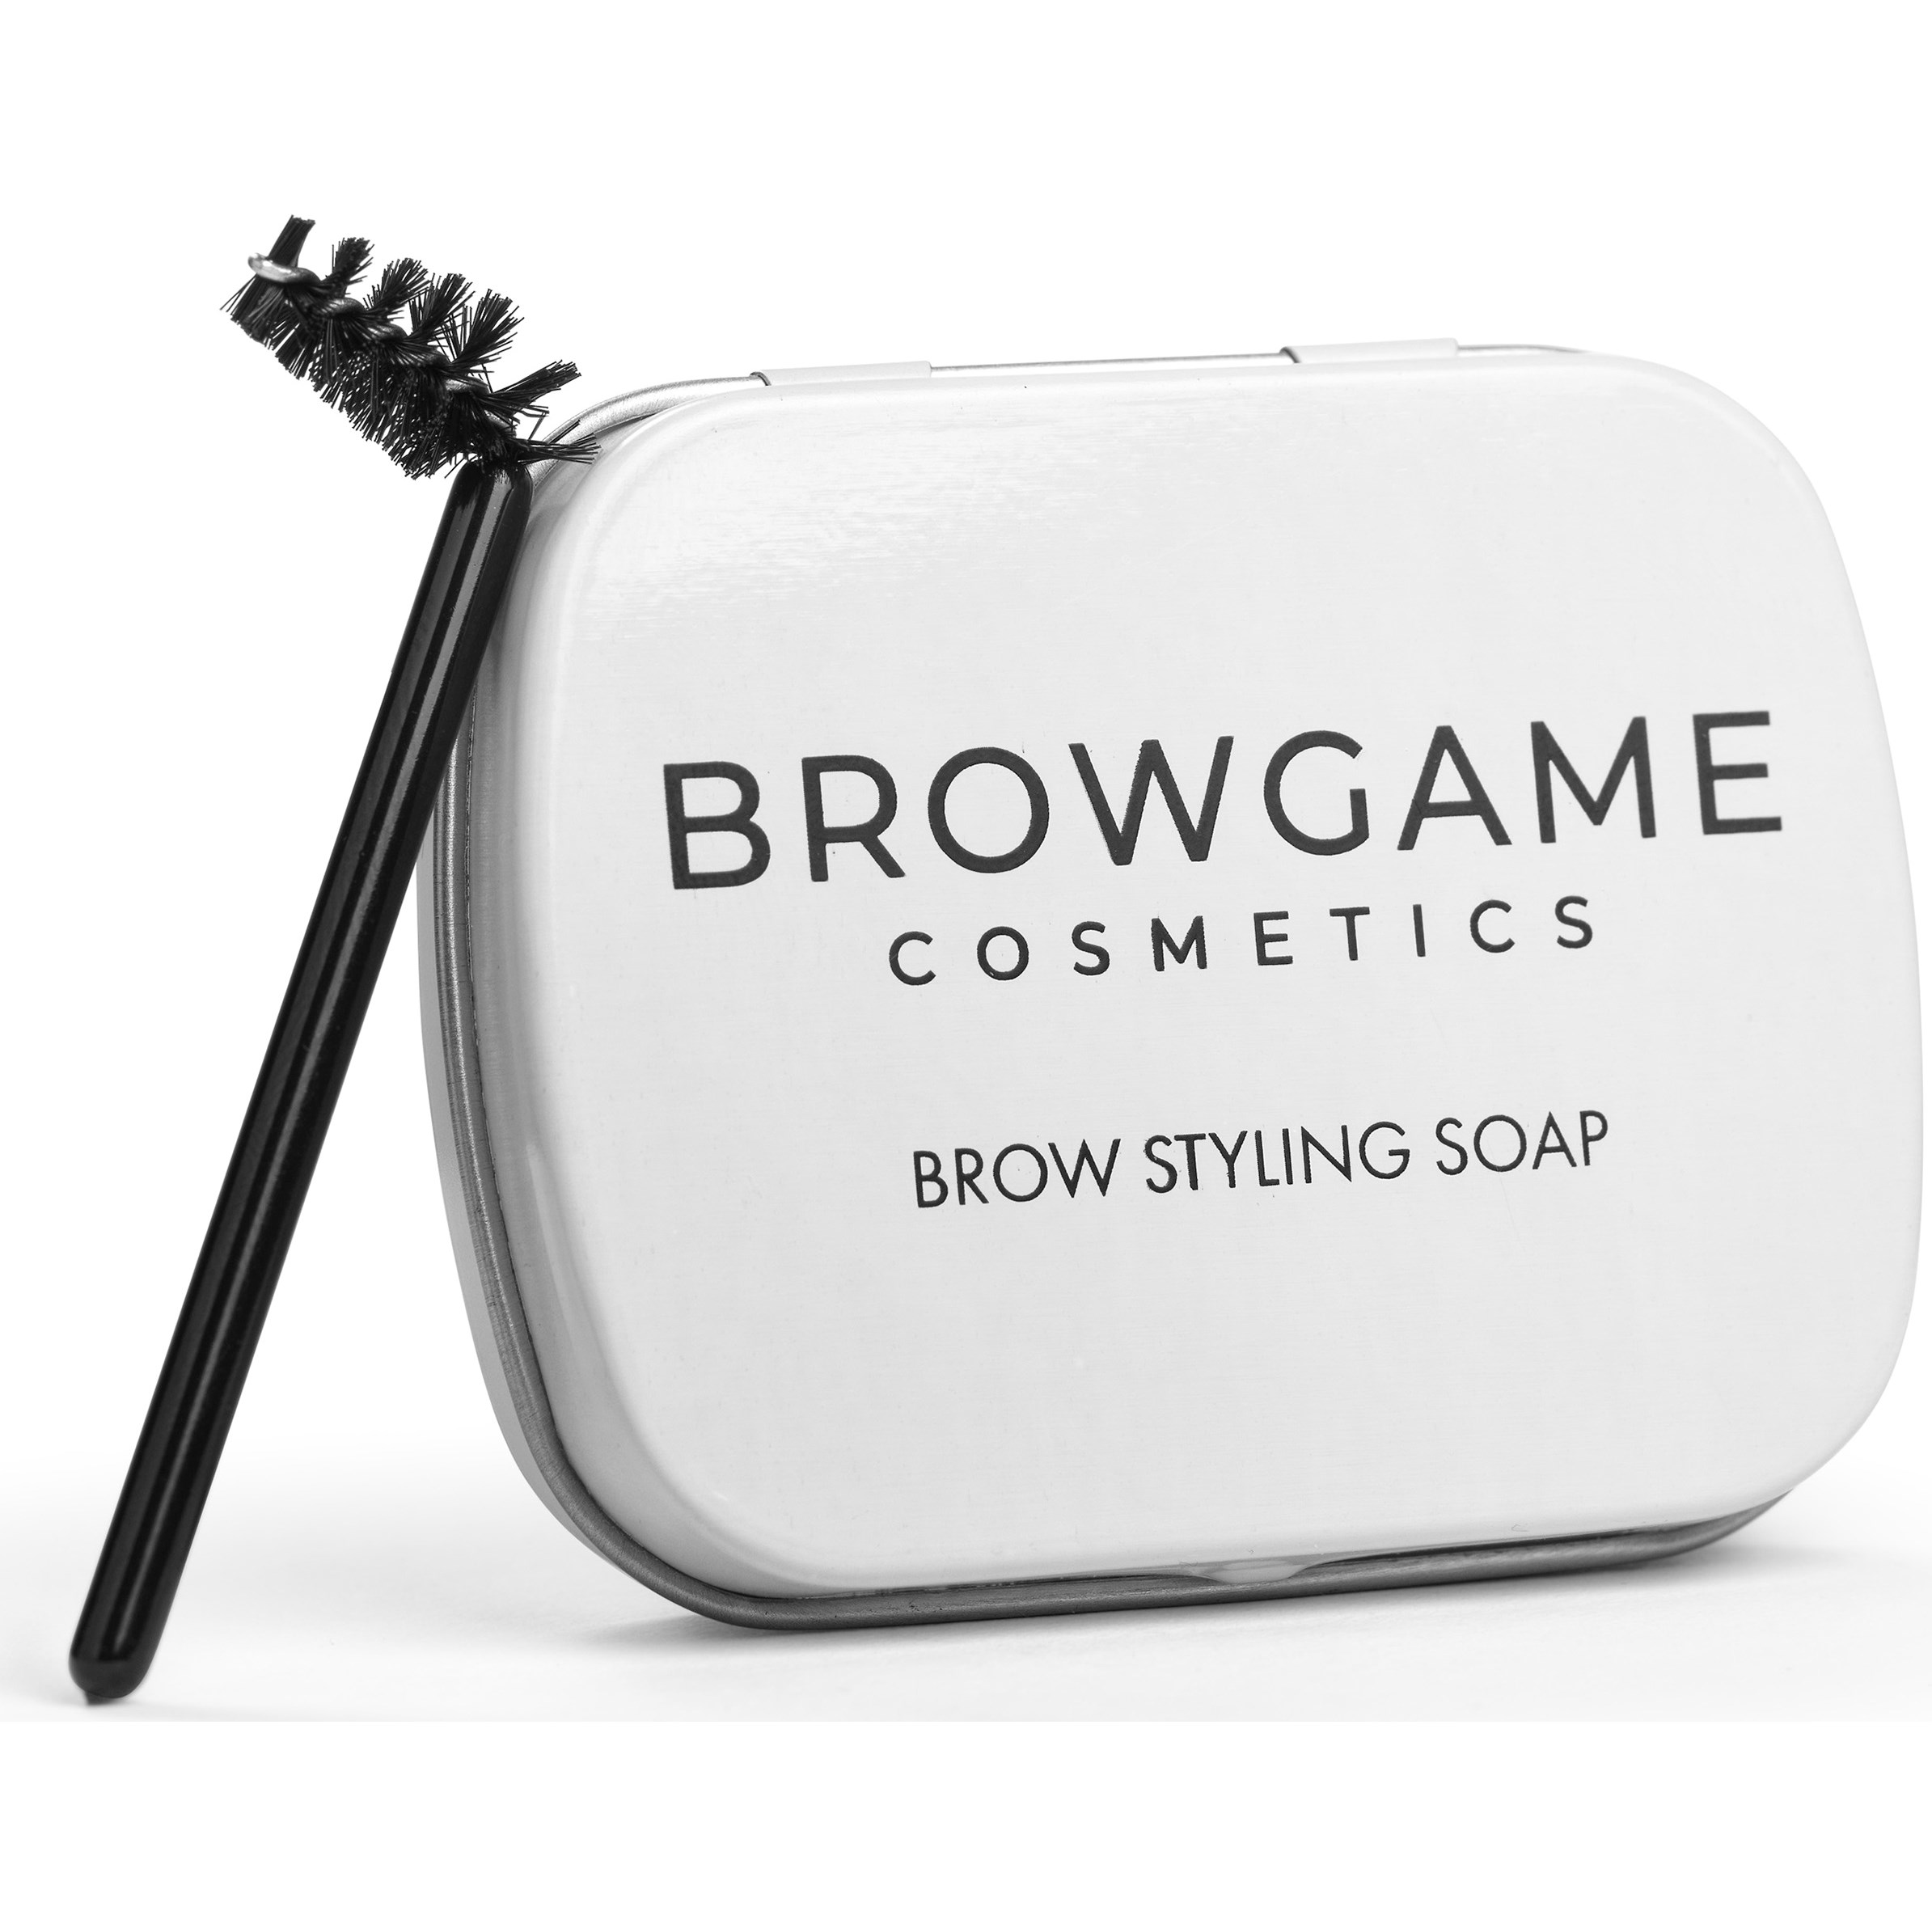 Läs mer om Browgame Cosmetics Brow Styling Soap